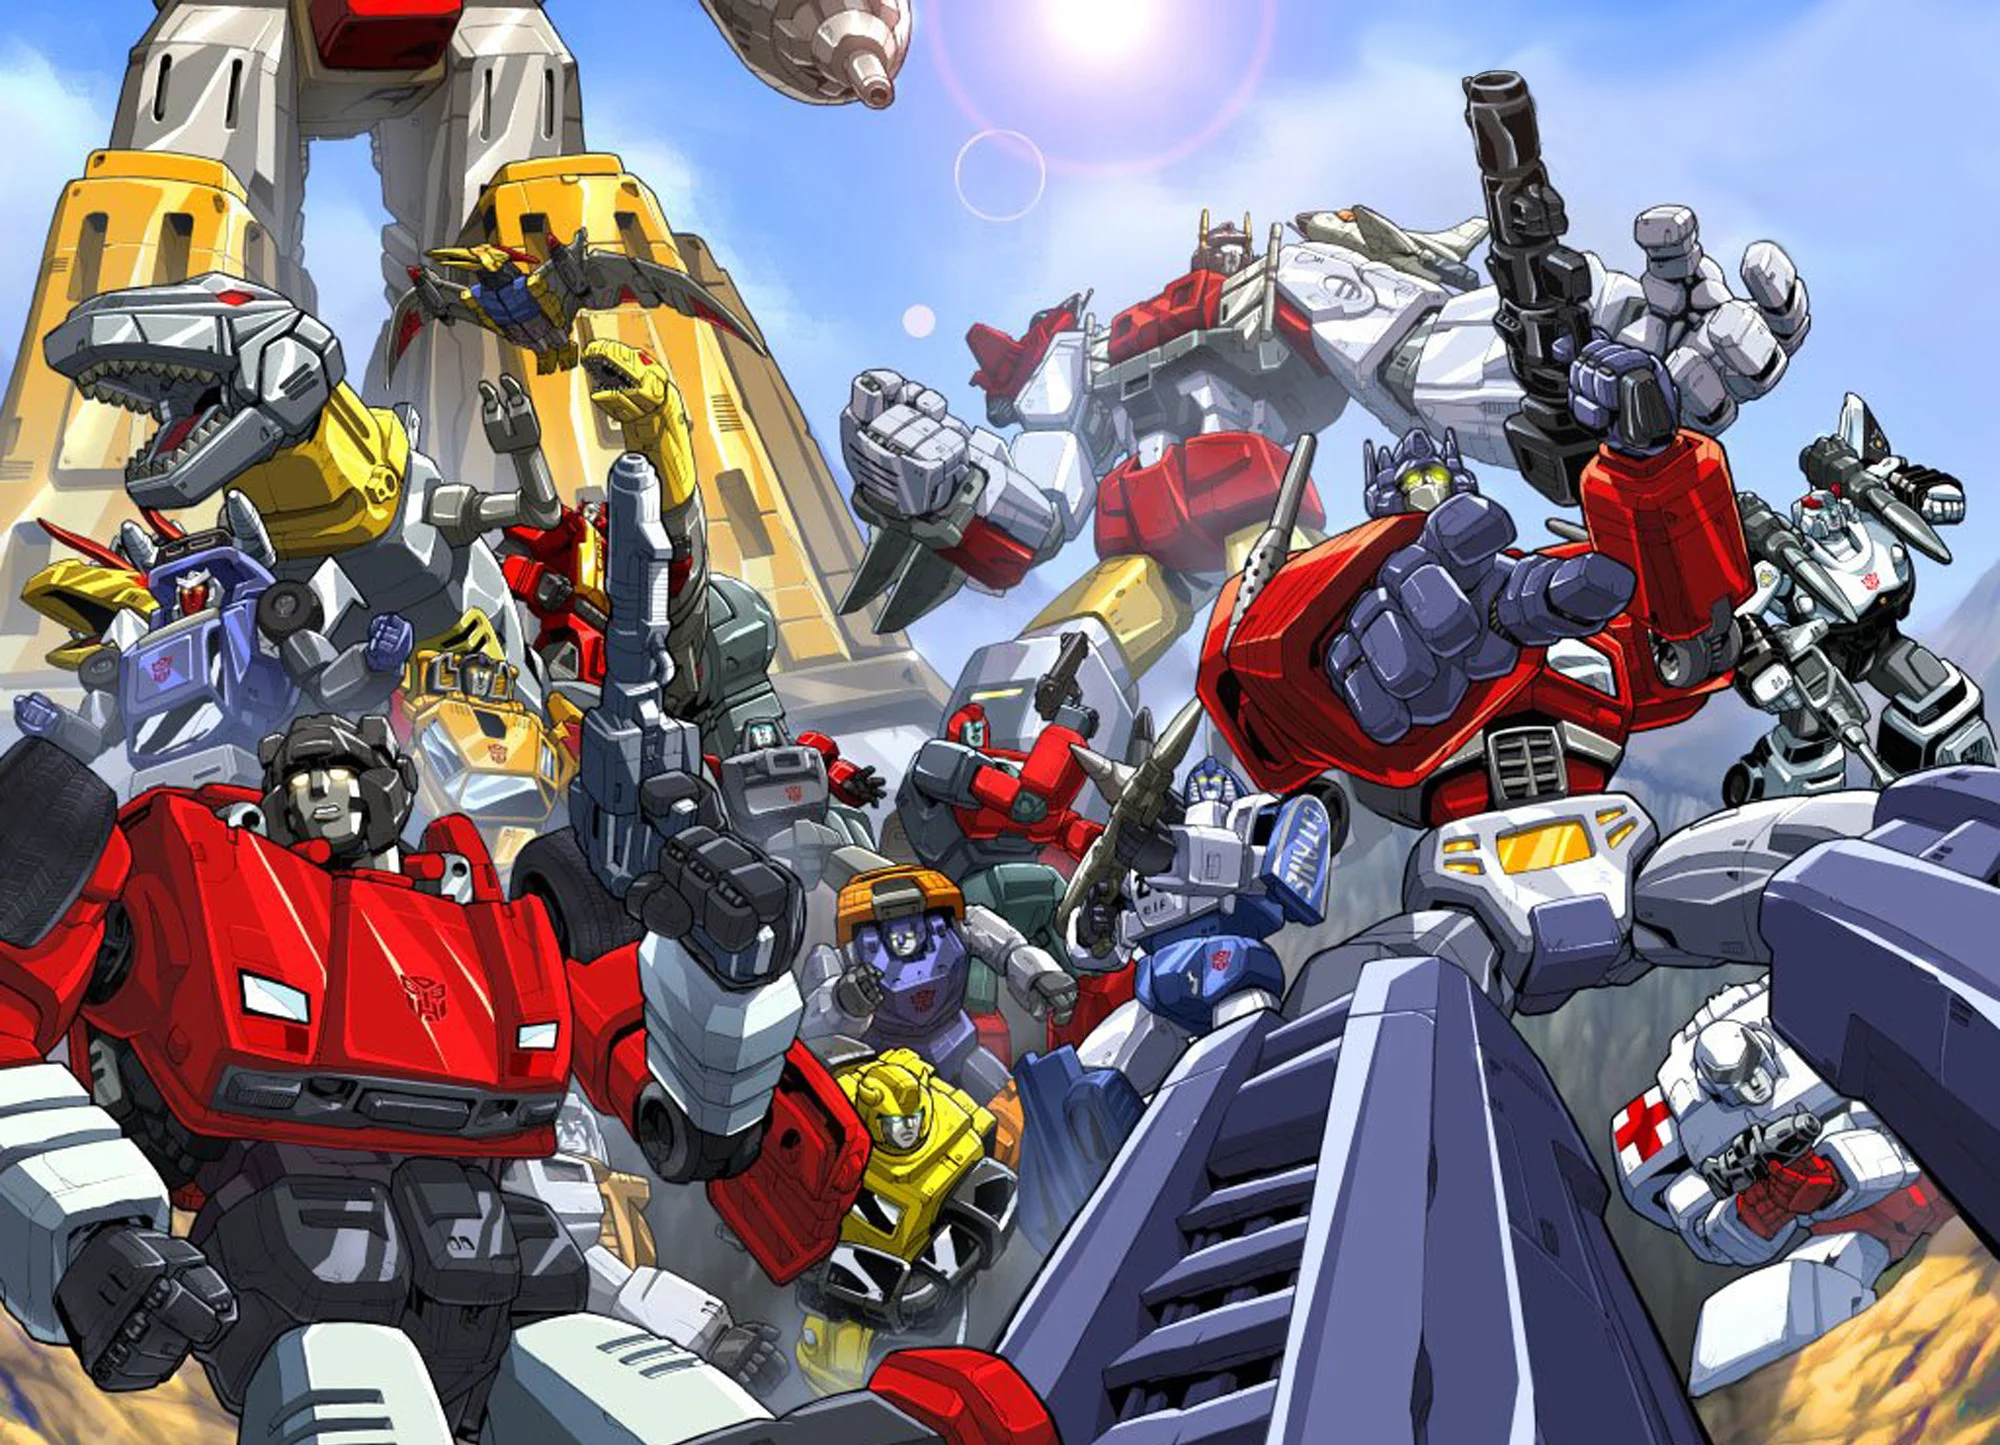 Transformers Autobots by Pat Lee